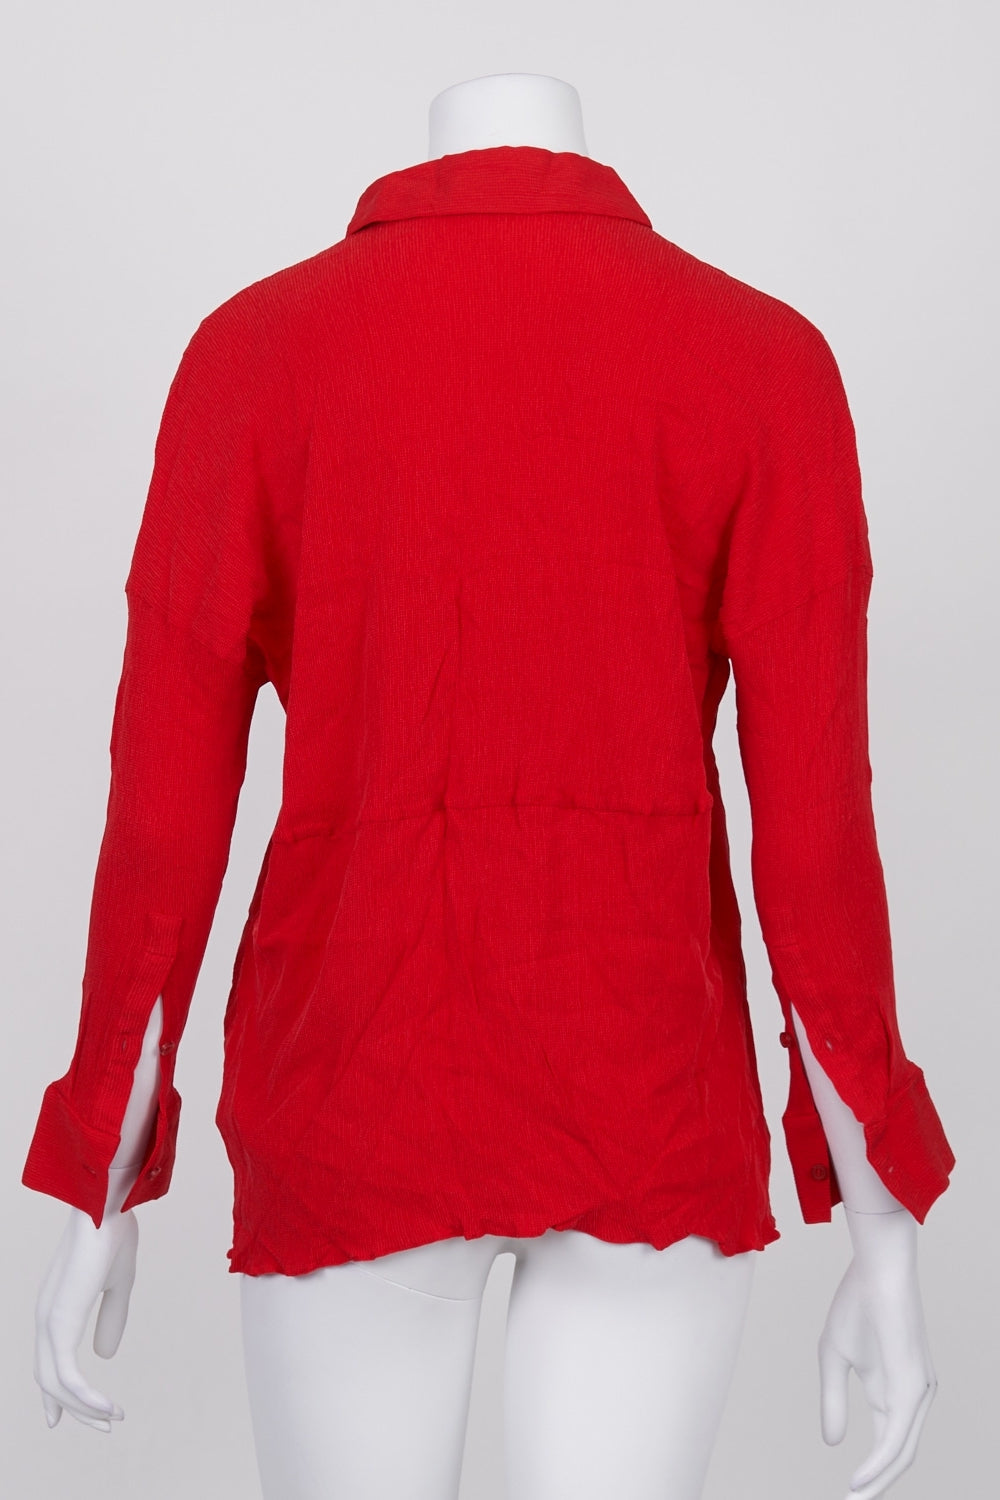 COS Red Button Front Top XS